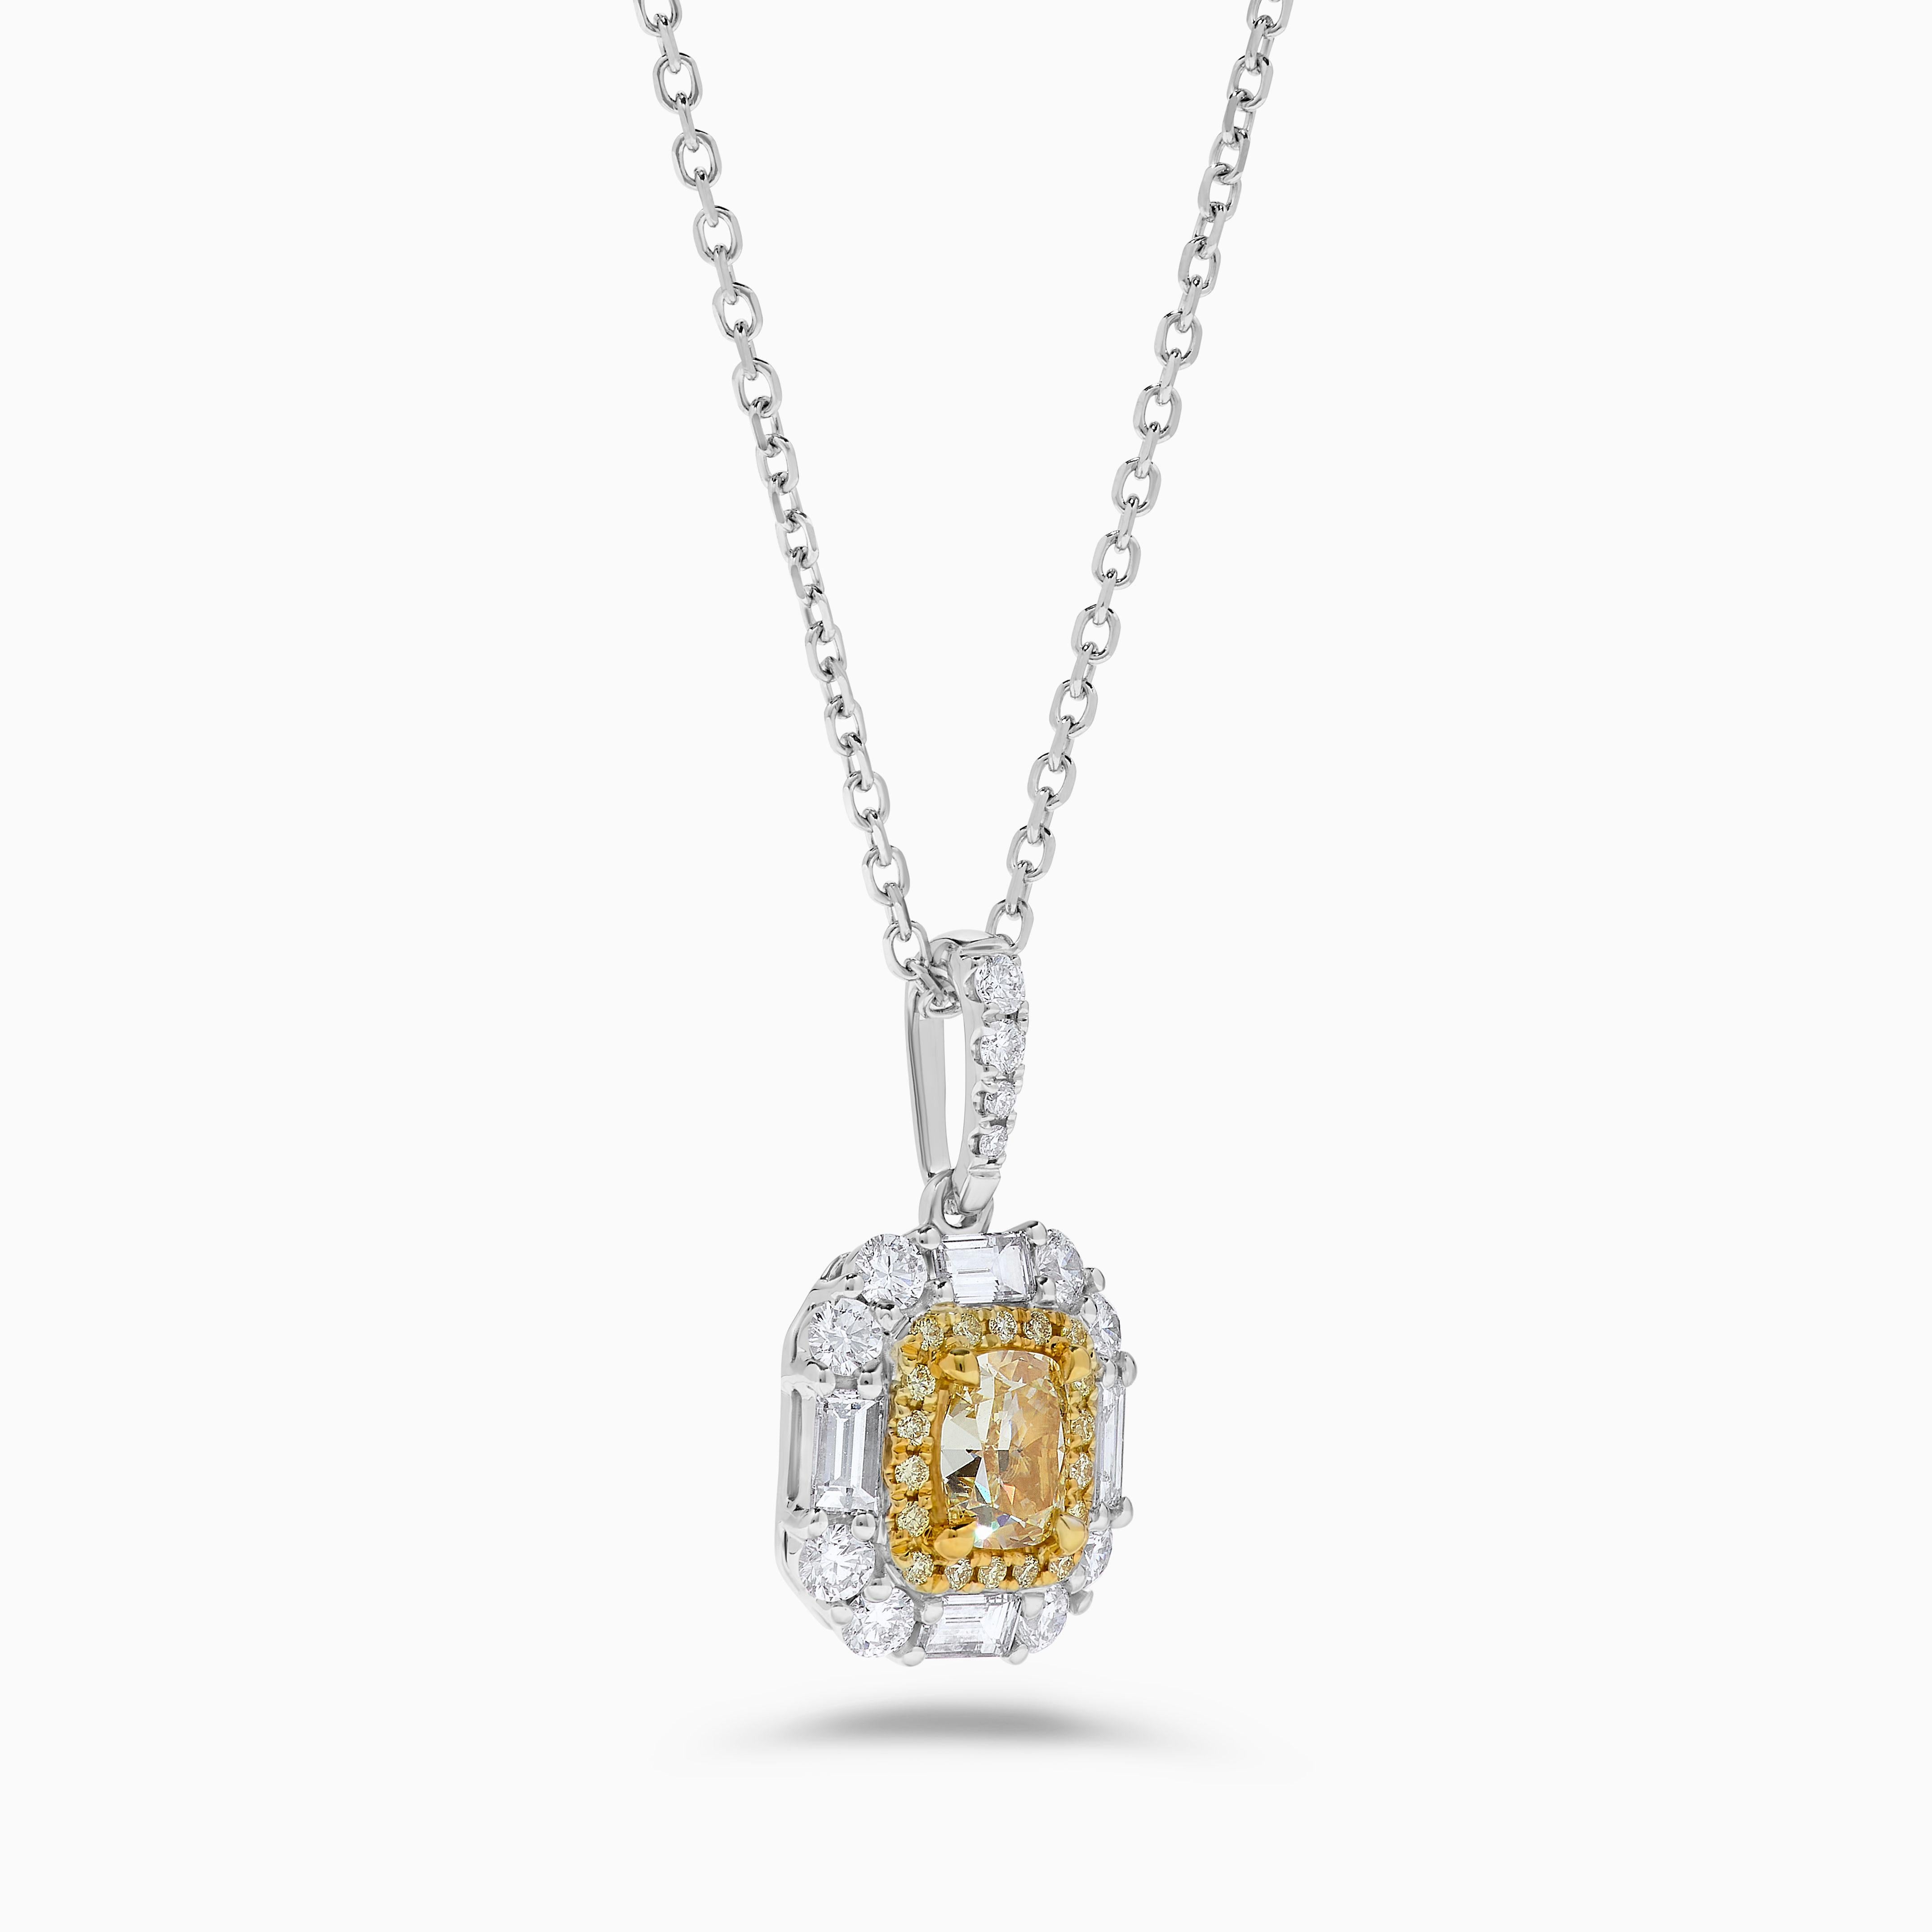 RareGemWorld's intriguing GIA certified diamond pendant. Mounted in a beautiful 18K Yellow and White Gold setting with a natural cushion cut yellow diamond. The yellow diamond is surrounded by natural baguette cut white diamonds, round natural